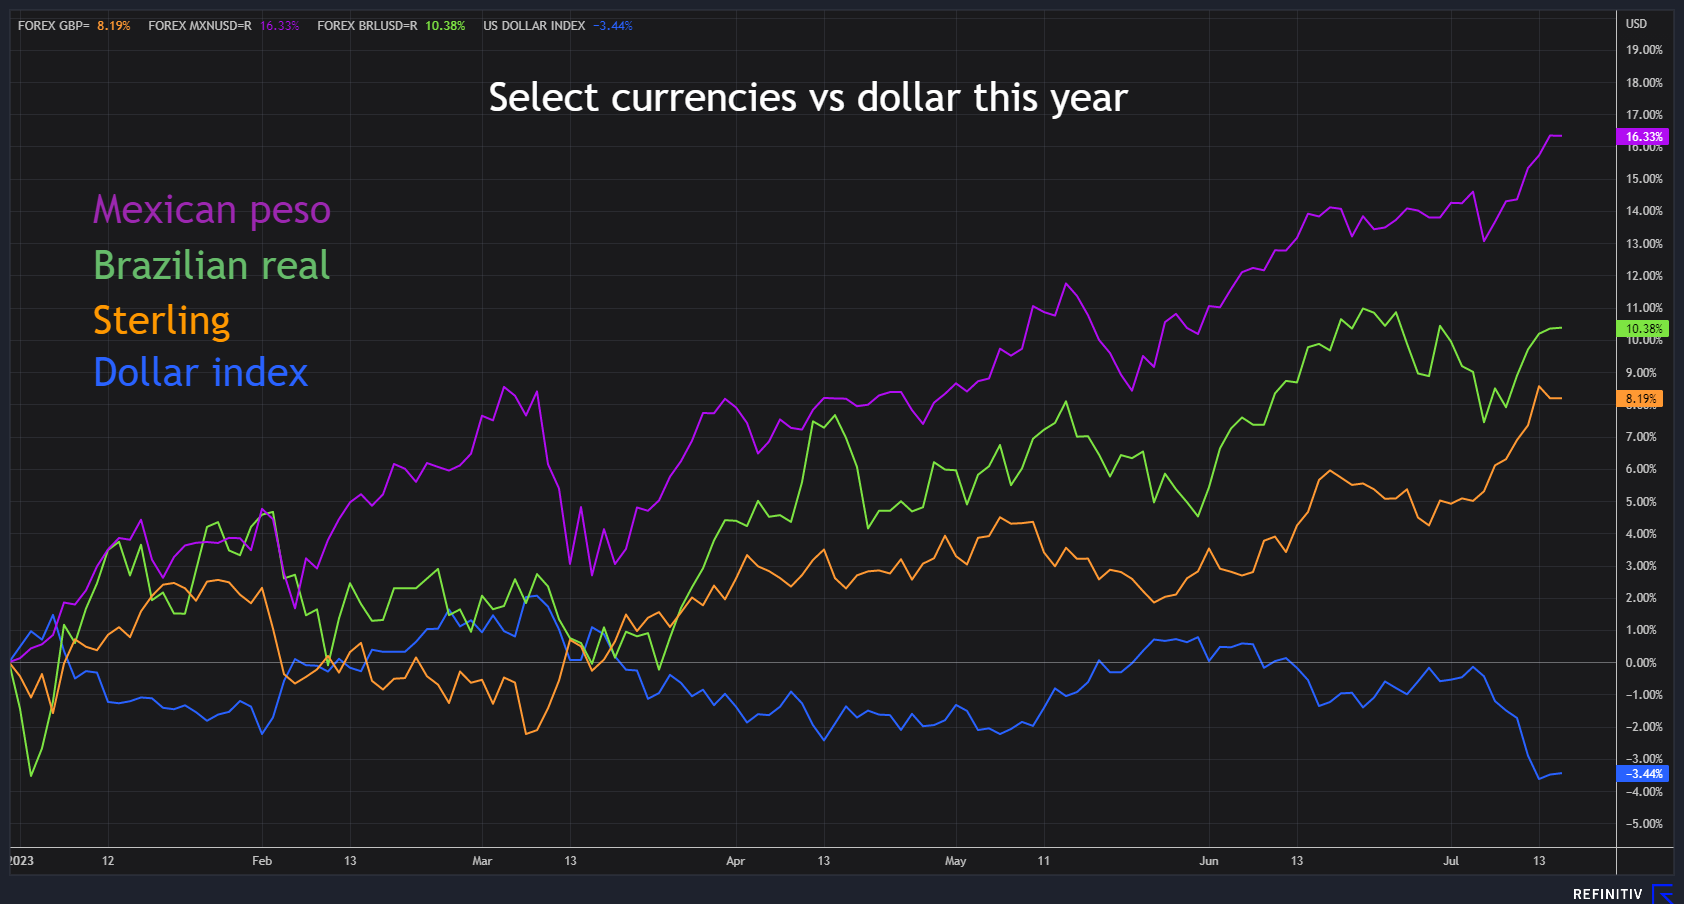 MXN, BRL and GBP performance this year